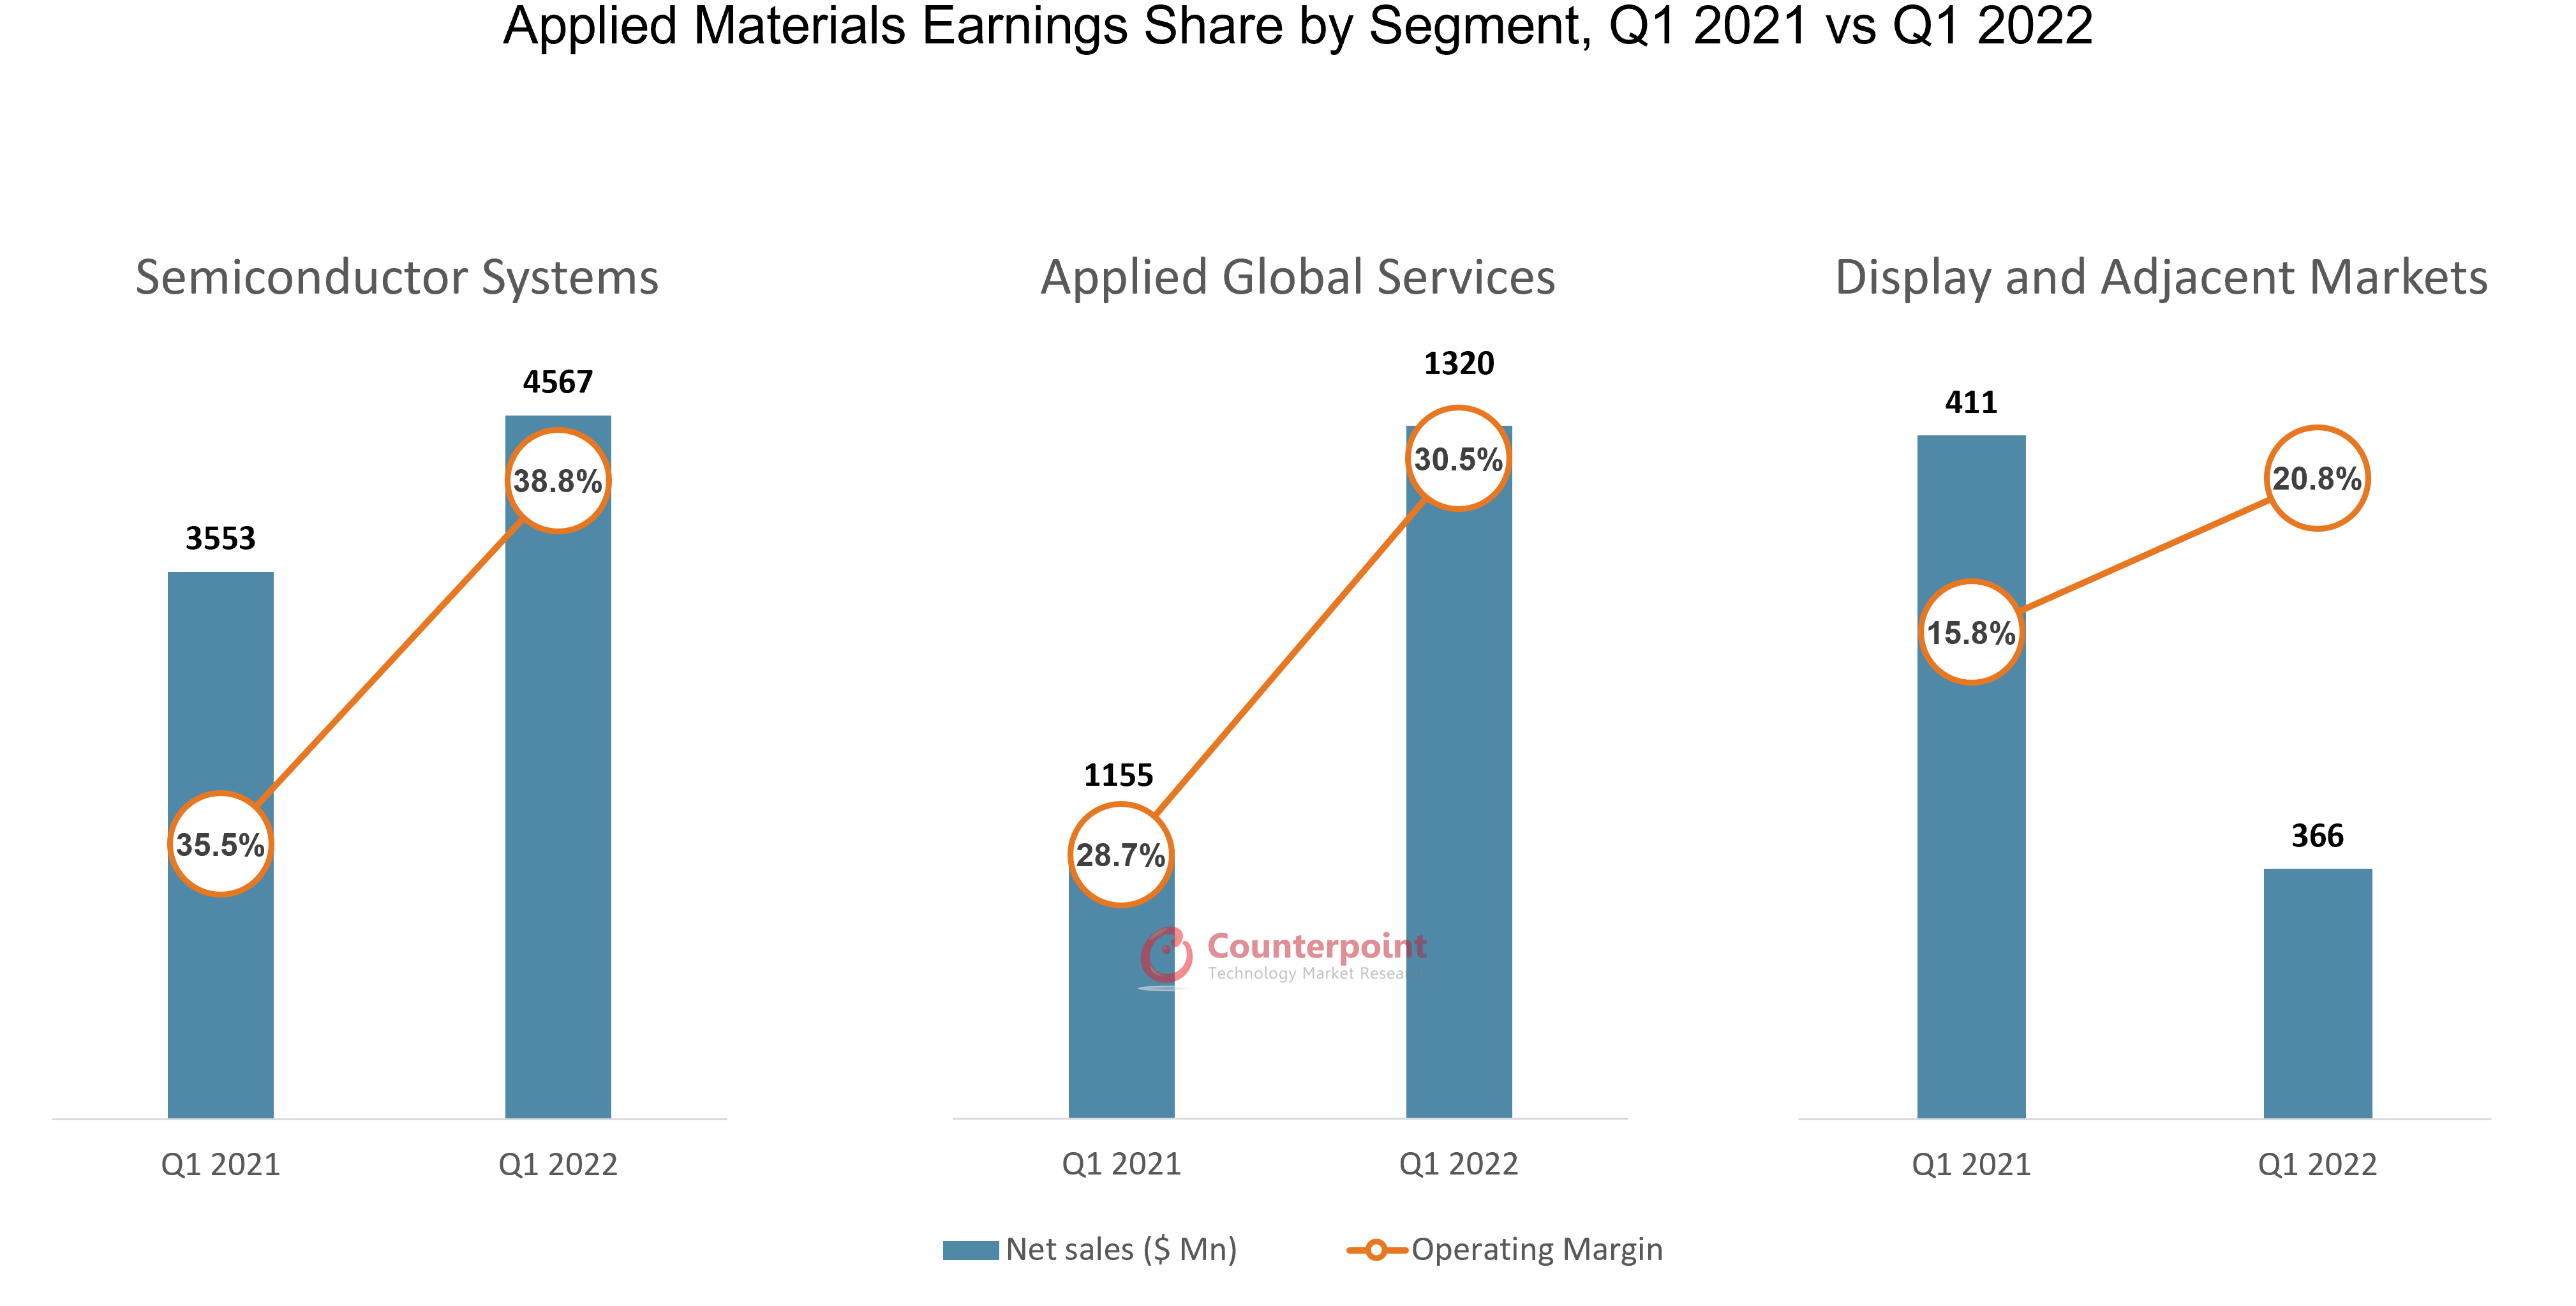 Applied Materials Earnings Share by Segment, Q1 2021 vs Q1 2022 Counterpoint Research